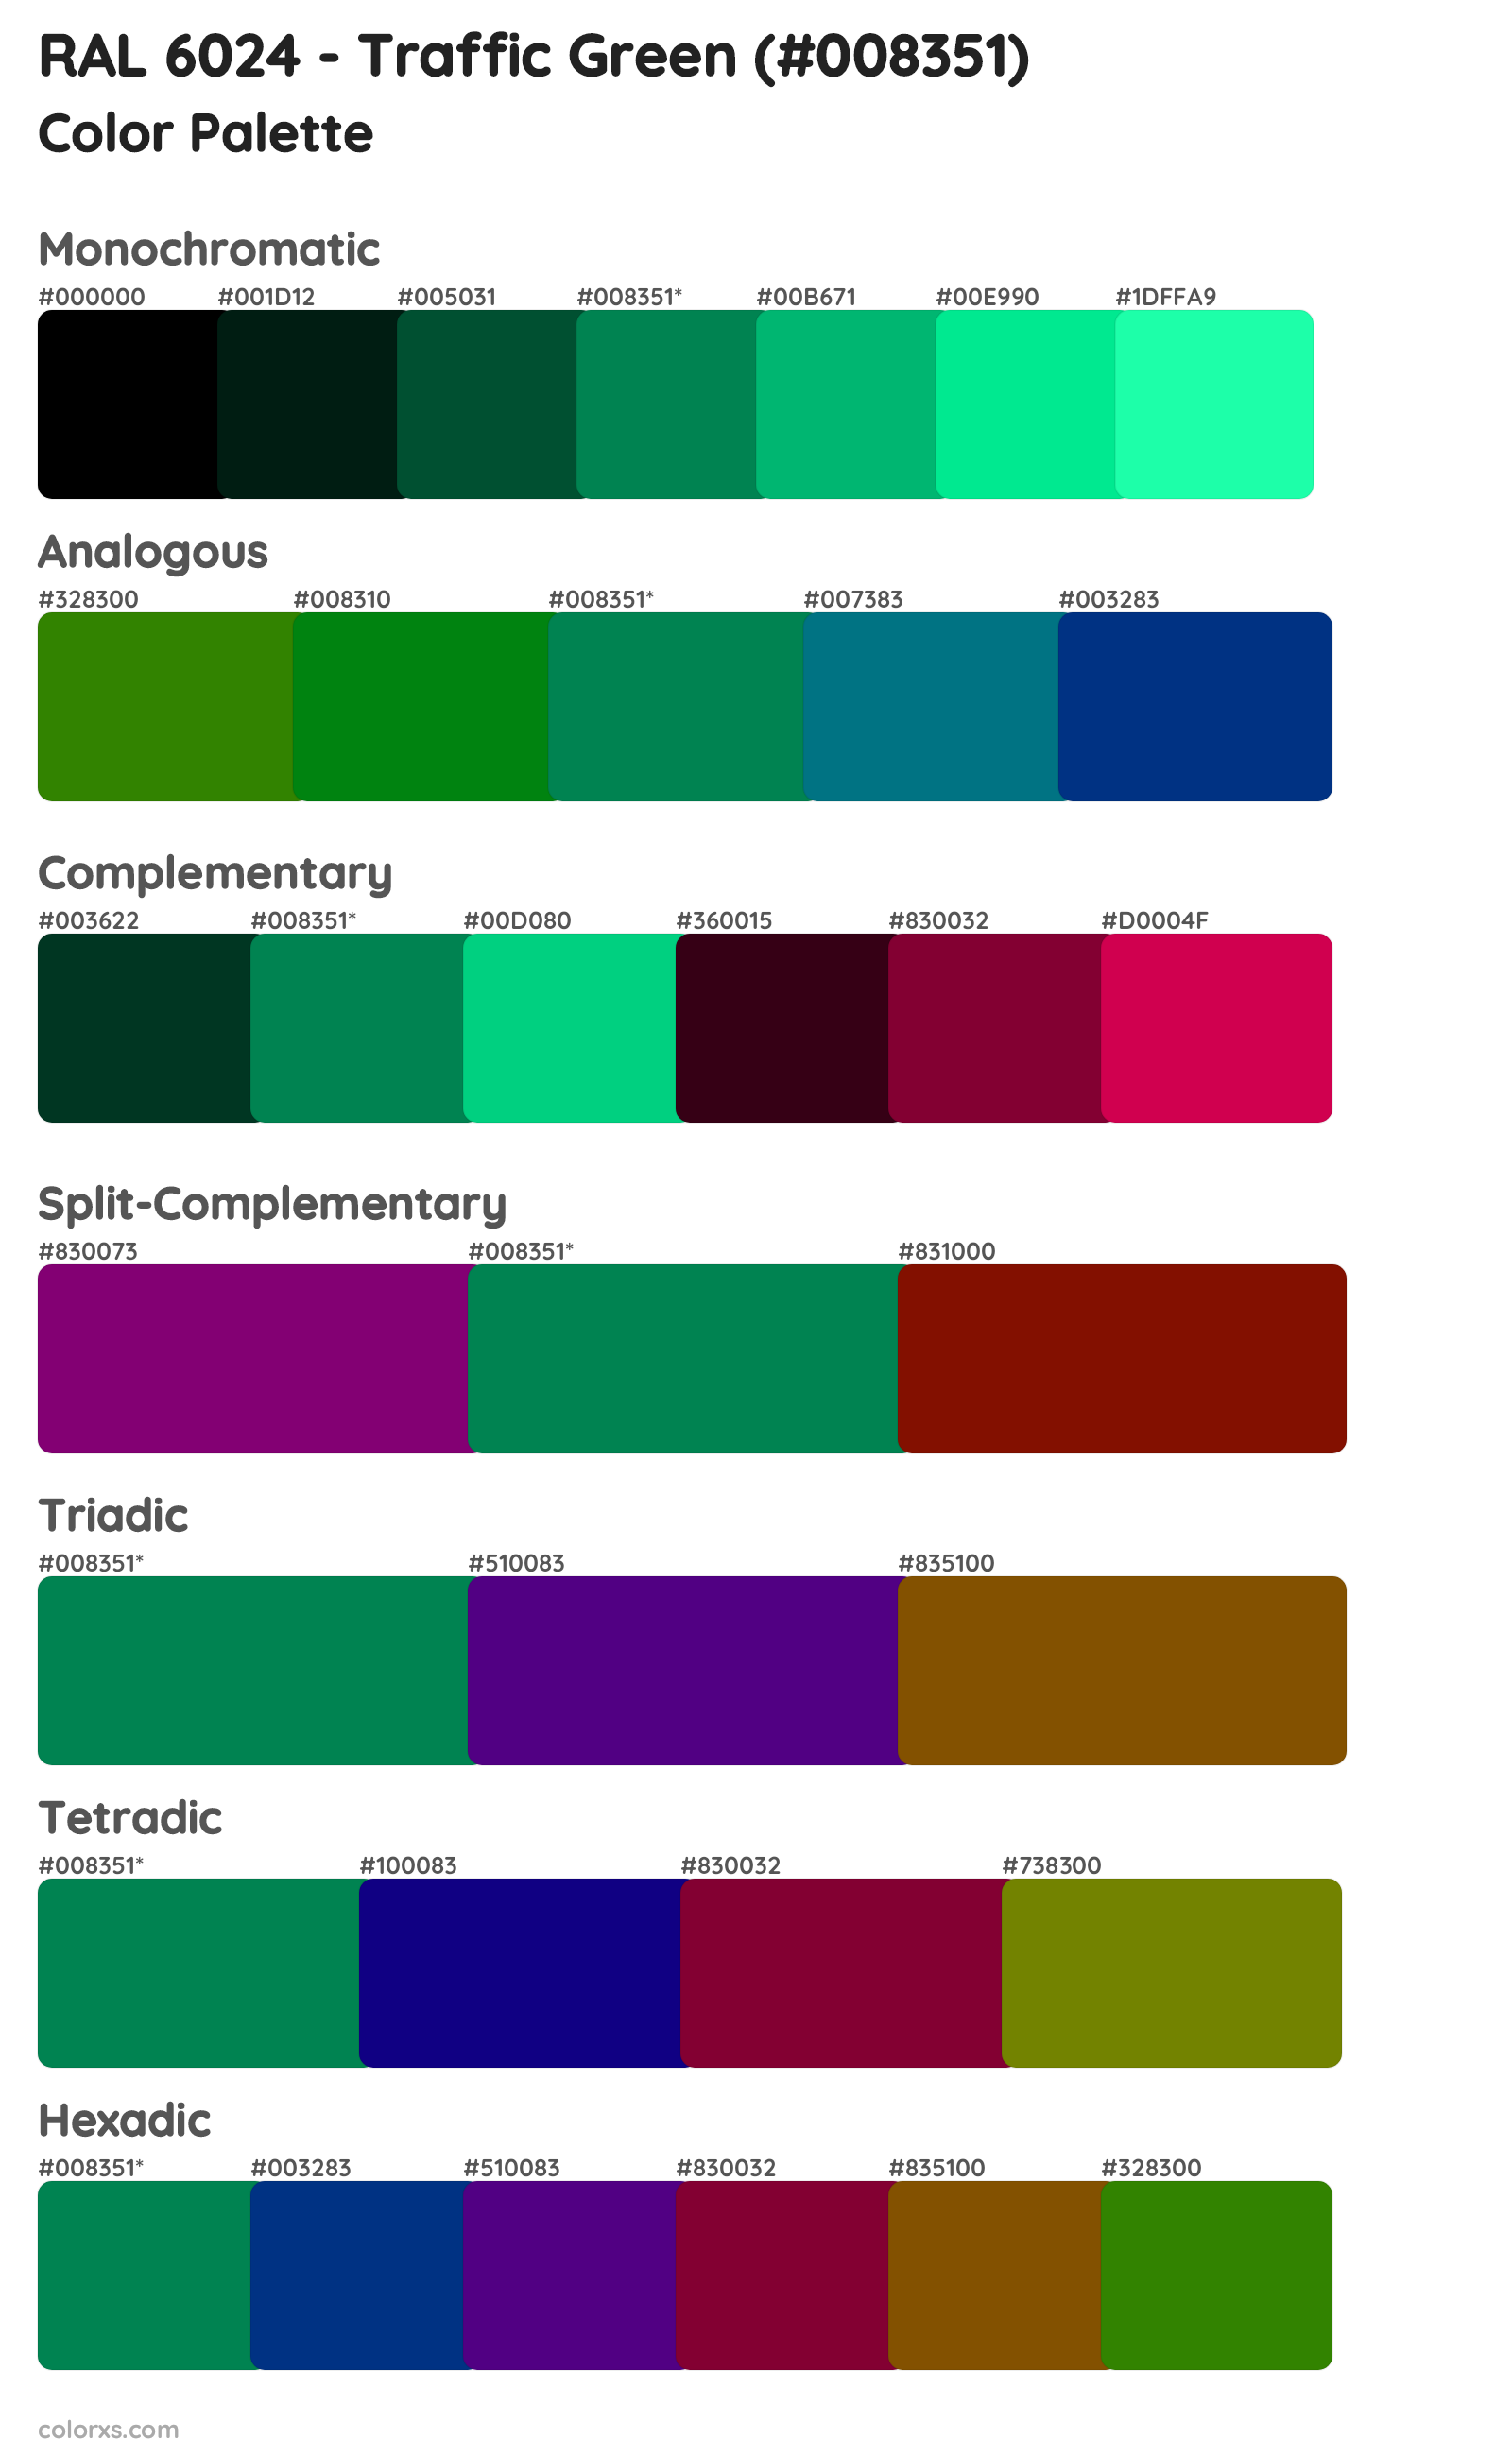 RAL 6024 - Traffic Green Color Scheme Palettes